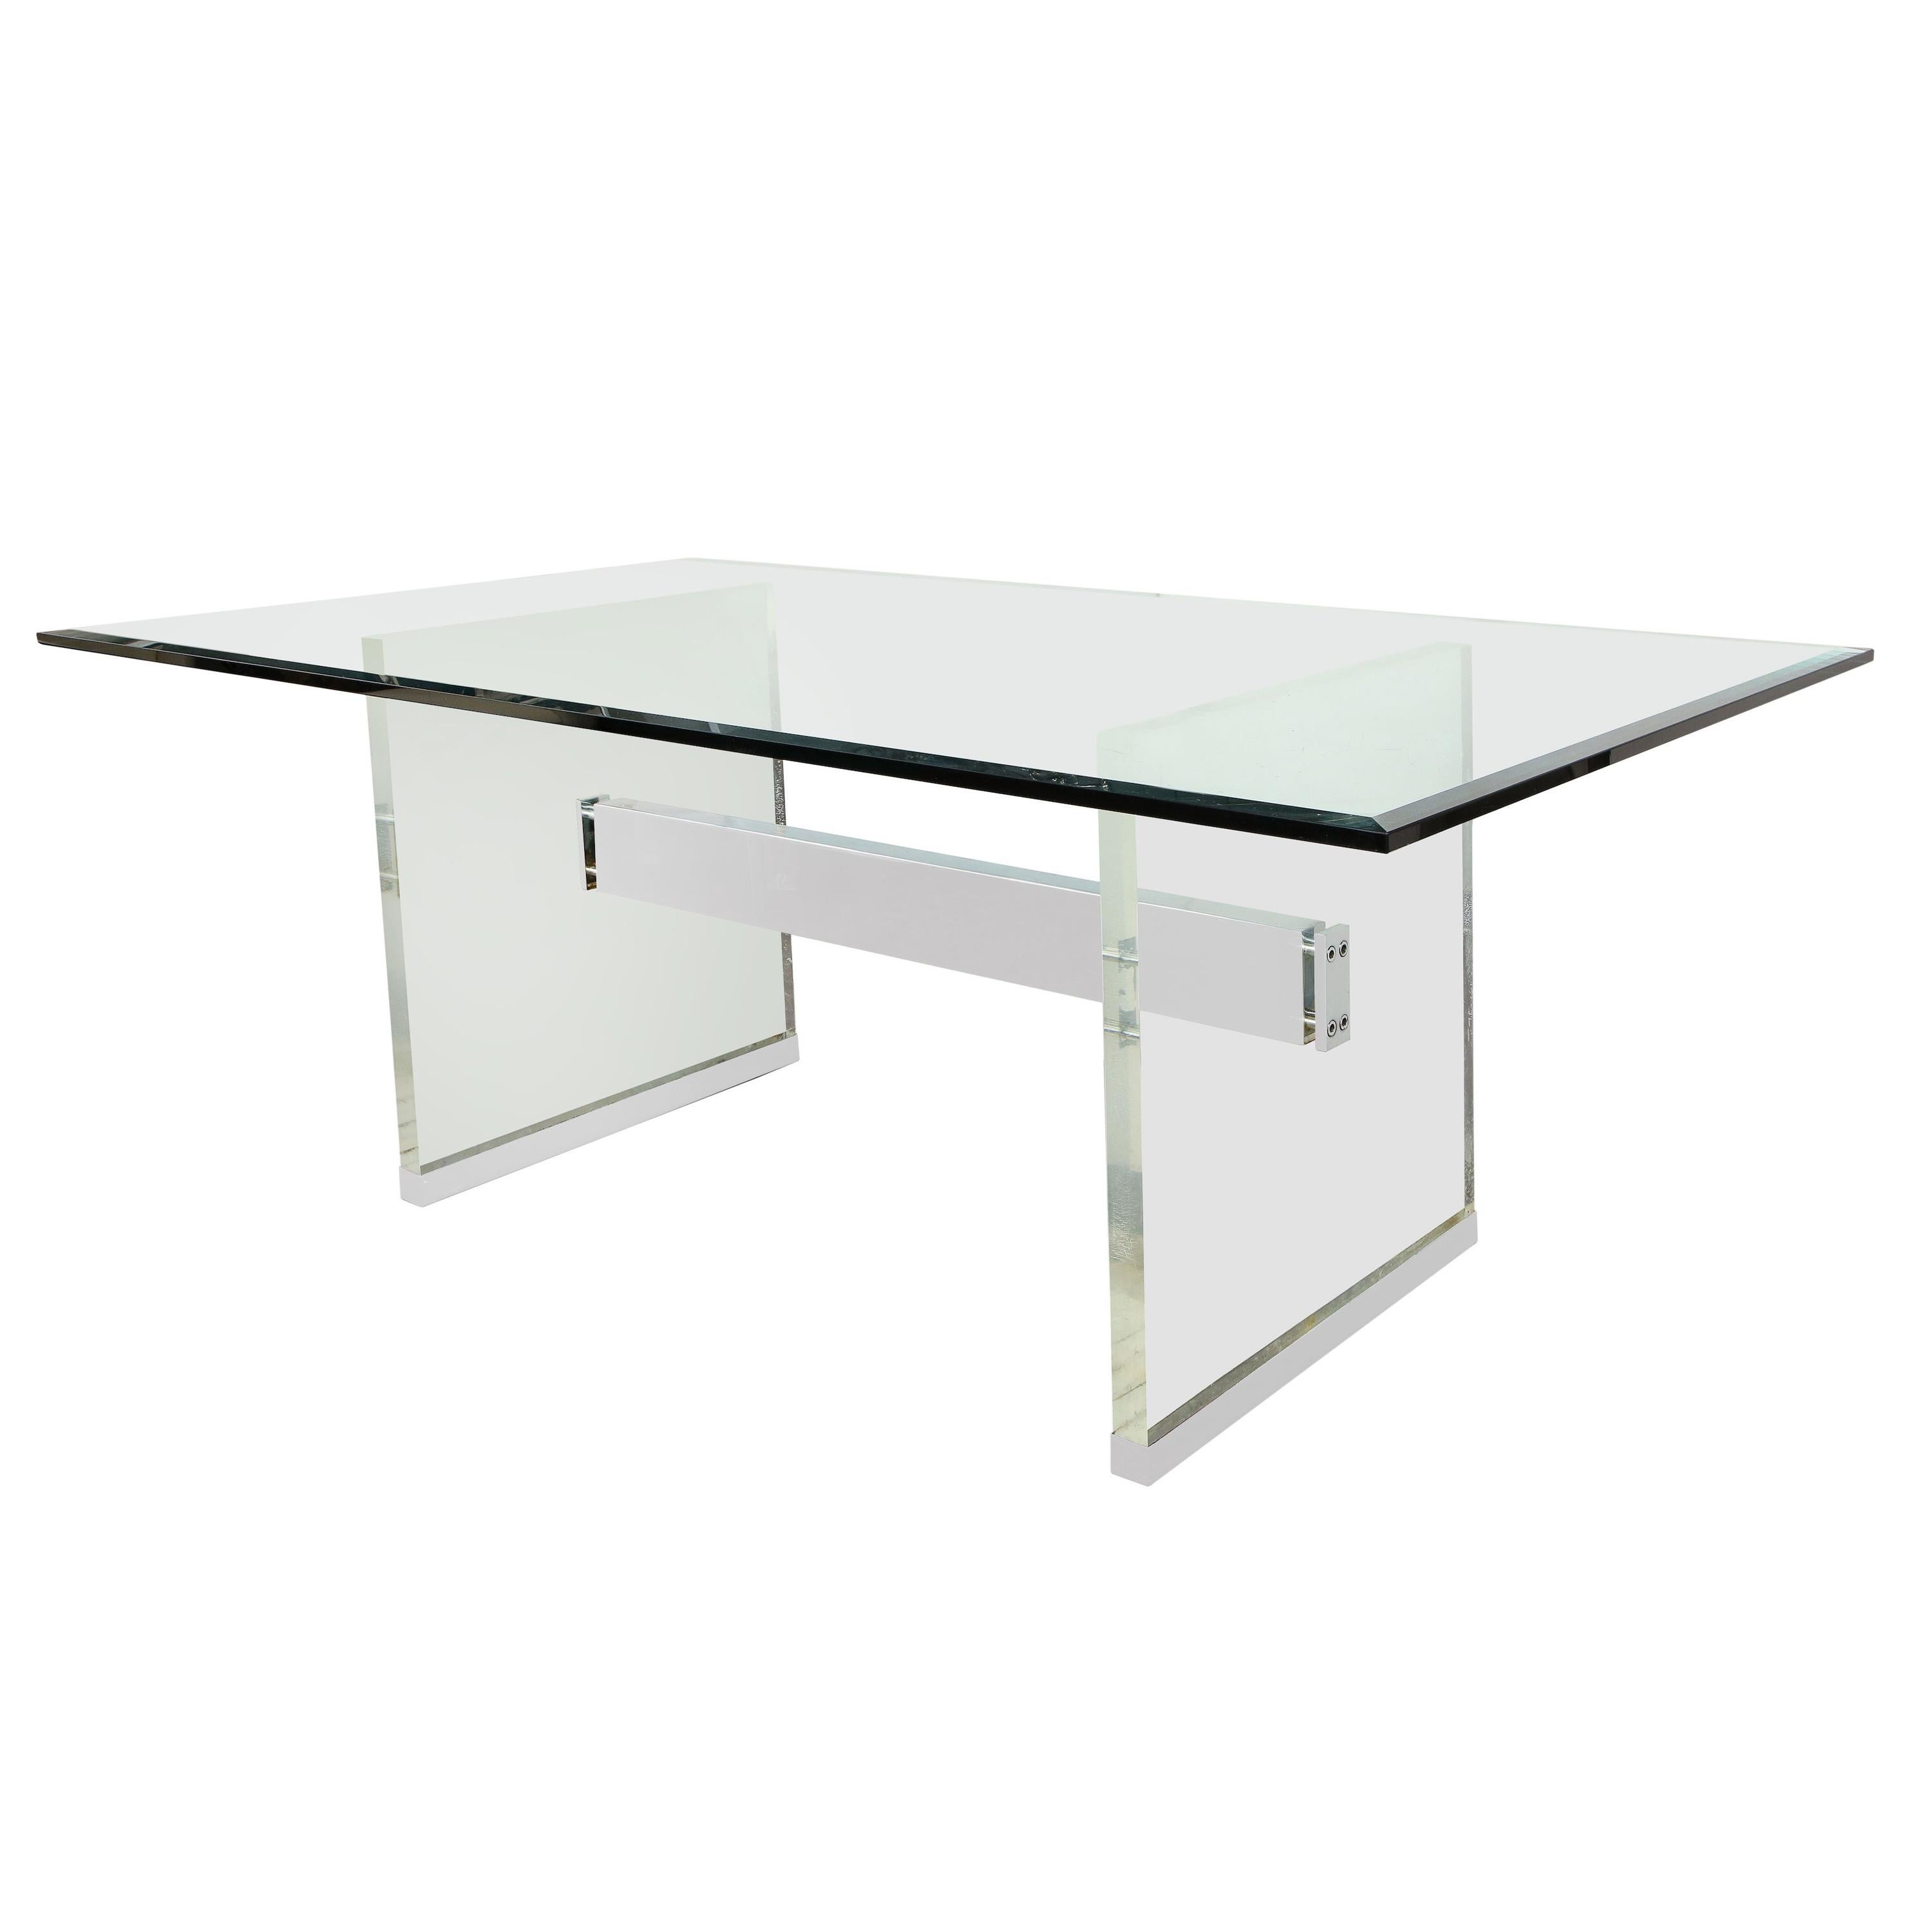 Charles Hollis Jones Dining Table with Lucite Legs